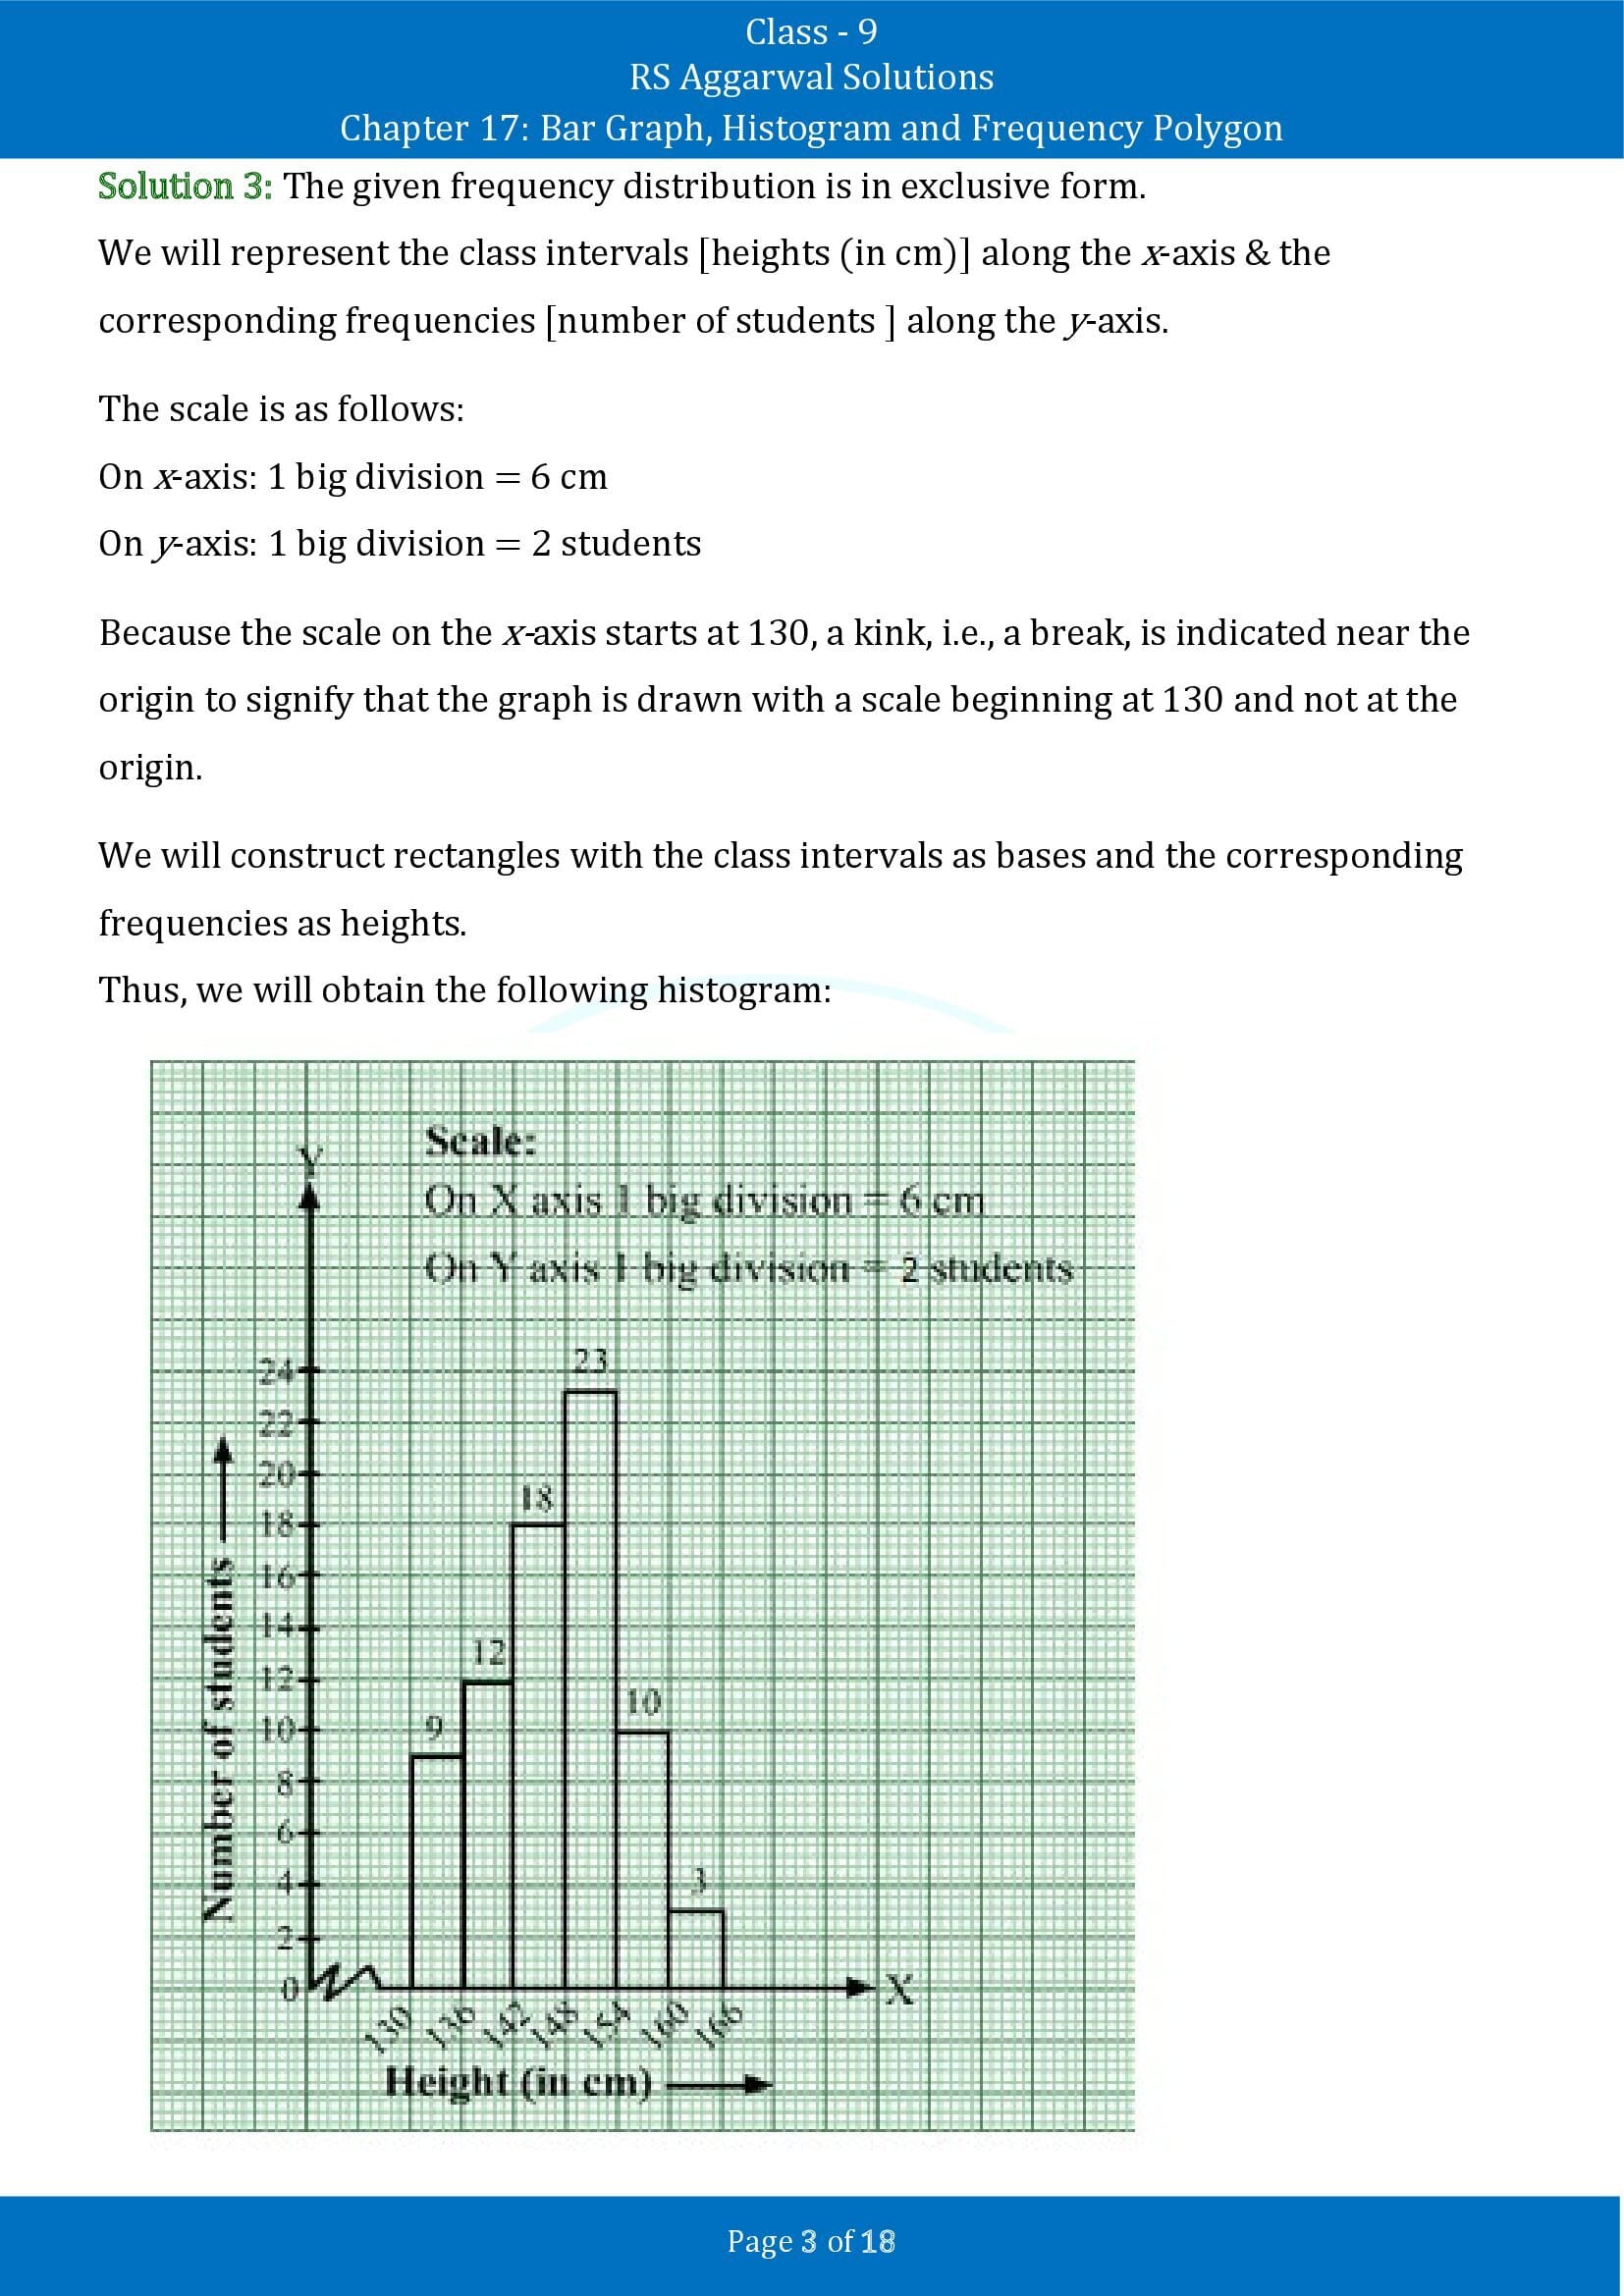 RS Aggarwal Solutions Class 9 Chapter 17 Bar Graph Histogram and Frequency Polygon Exercise 17B 00003